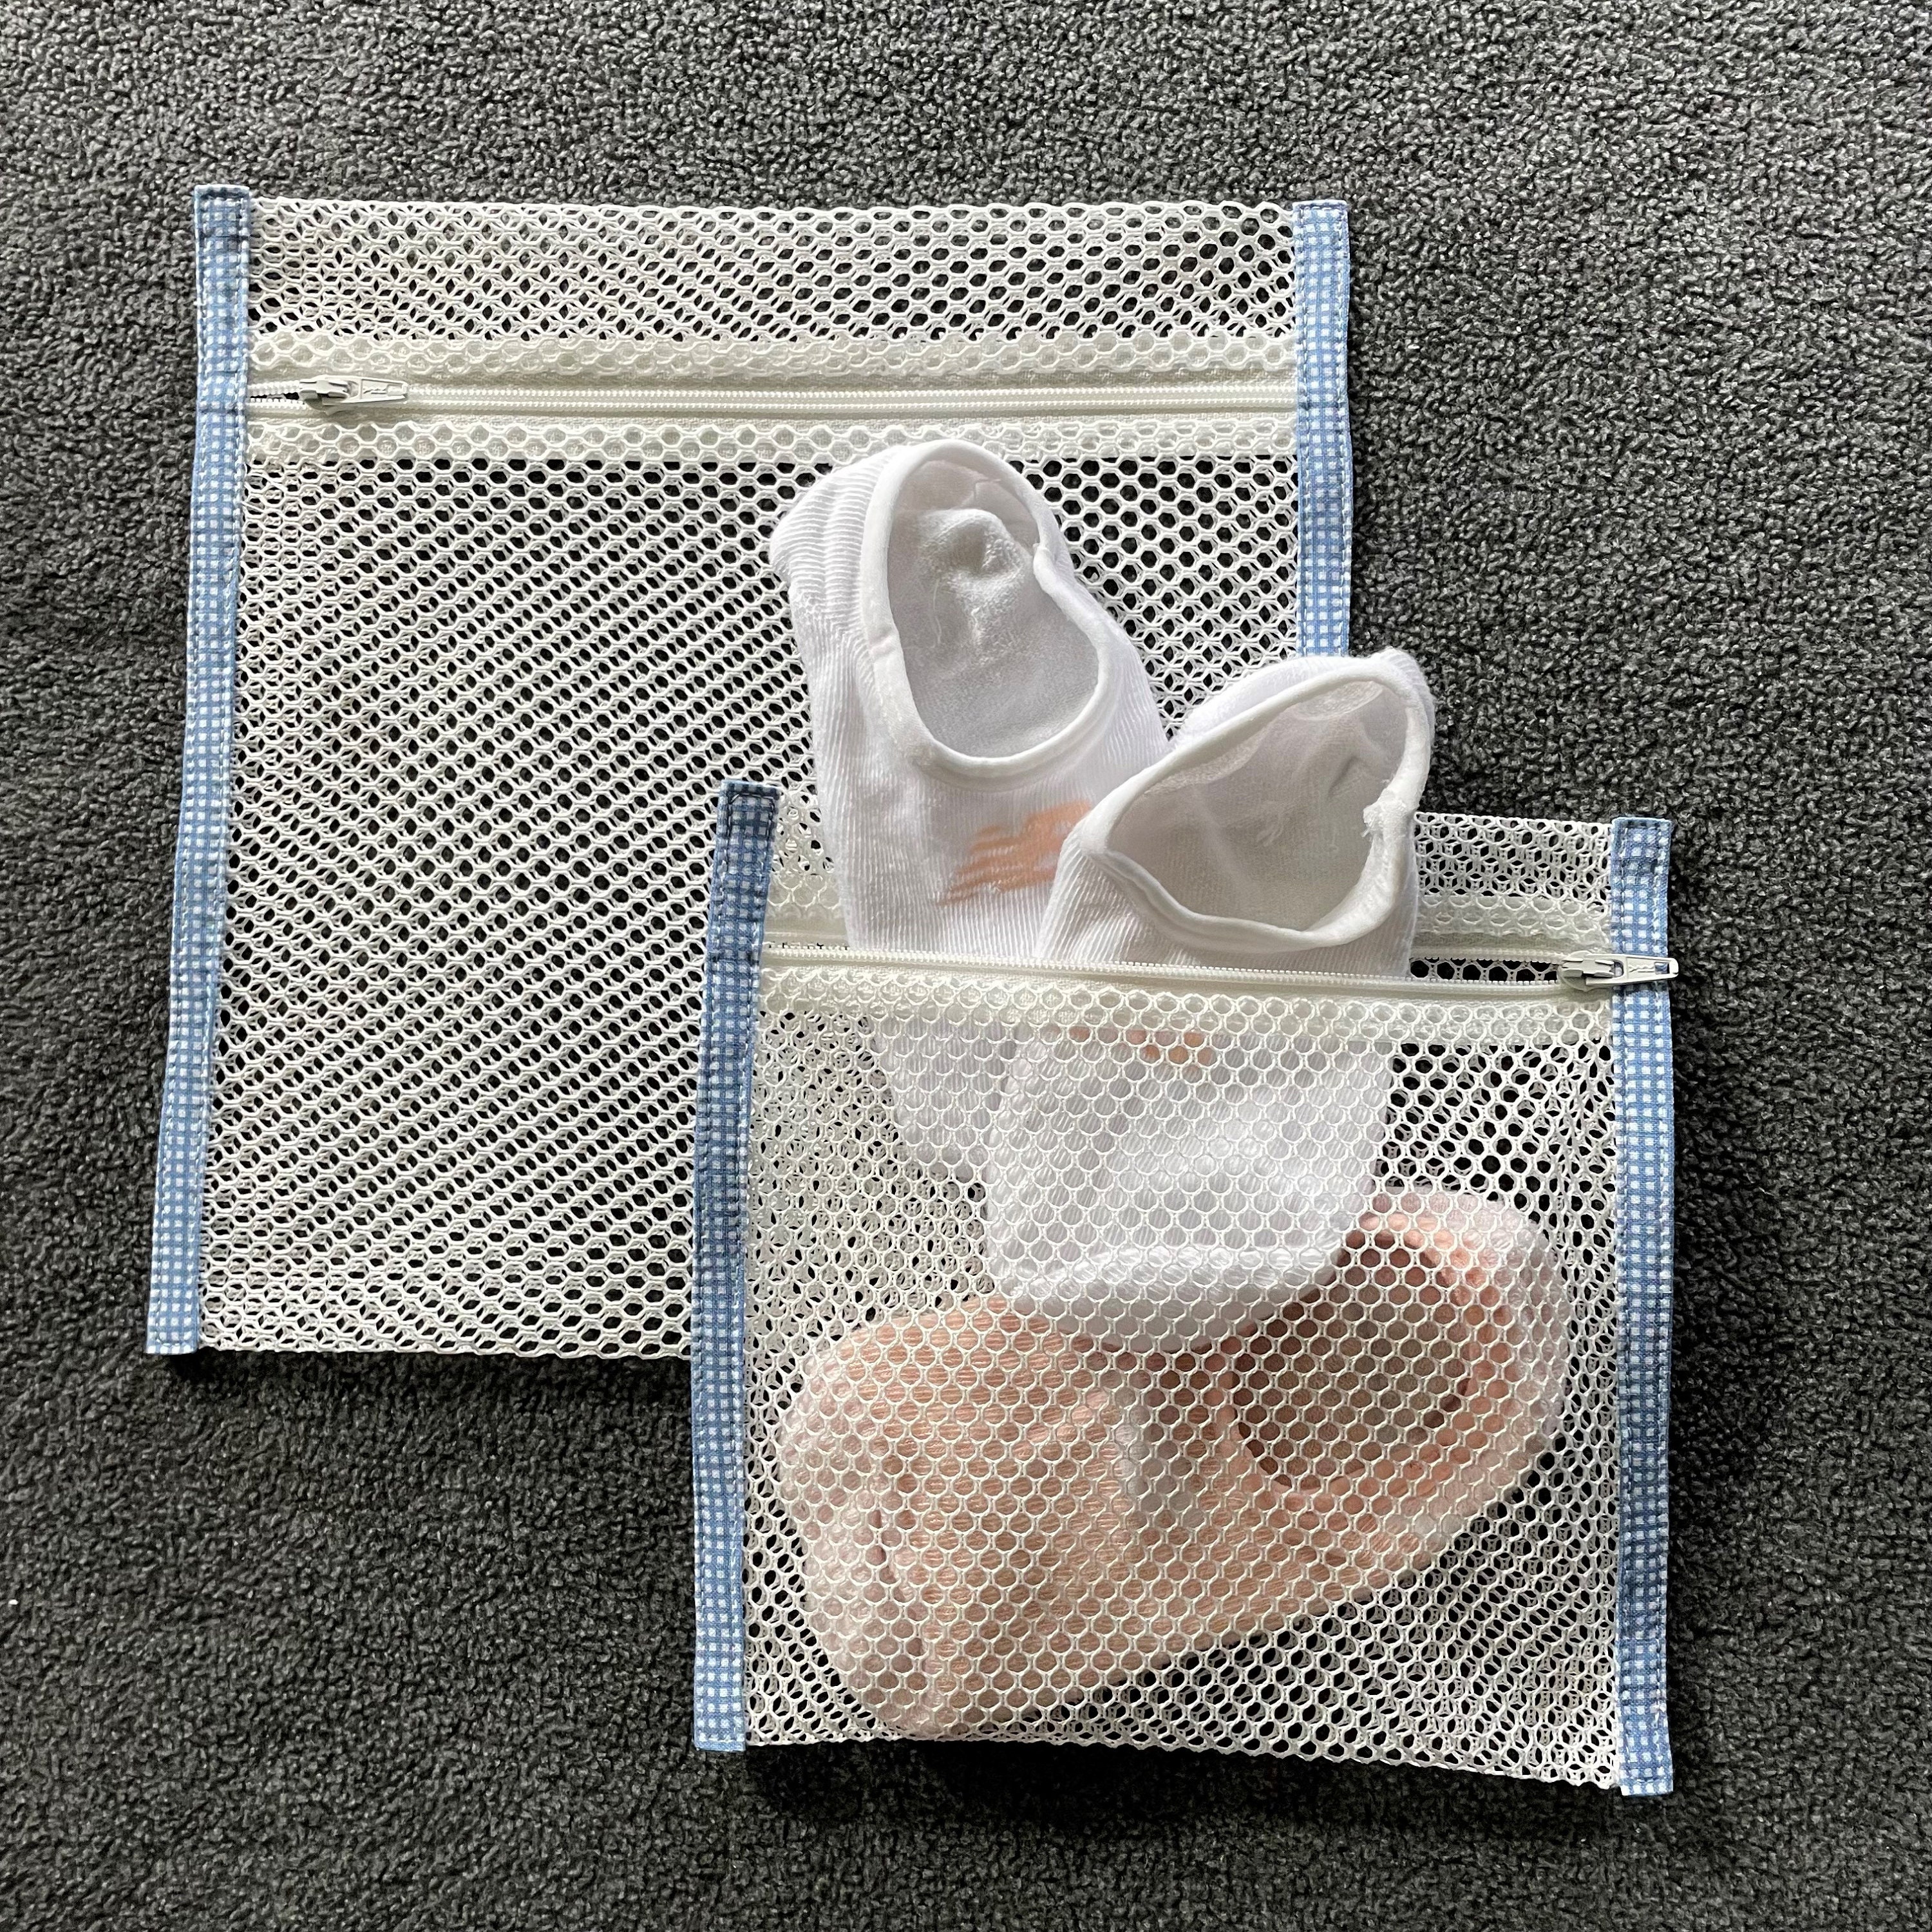 Set of 3 Durable Mesh Laundry Bags for Delicates,Have Hanger Loops (3  Medium 16 | eBay